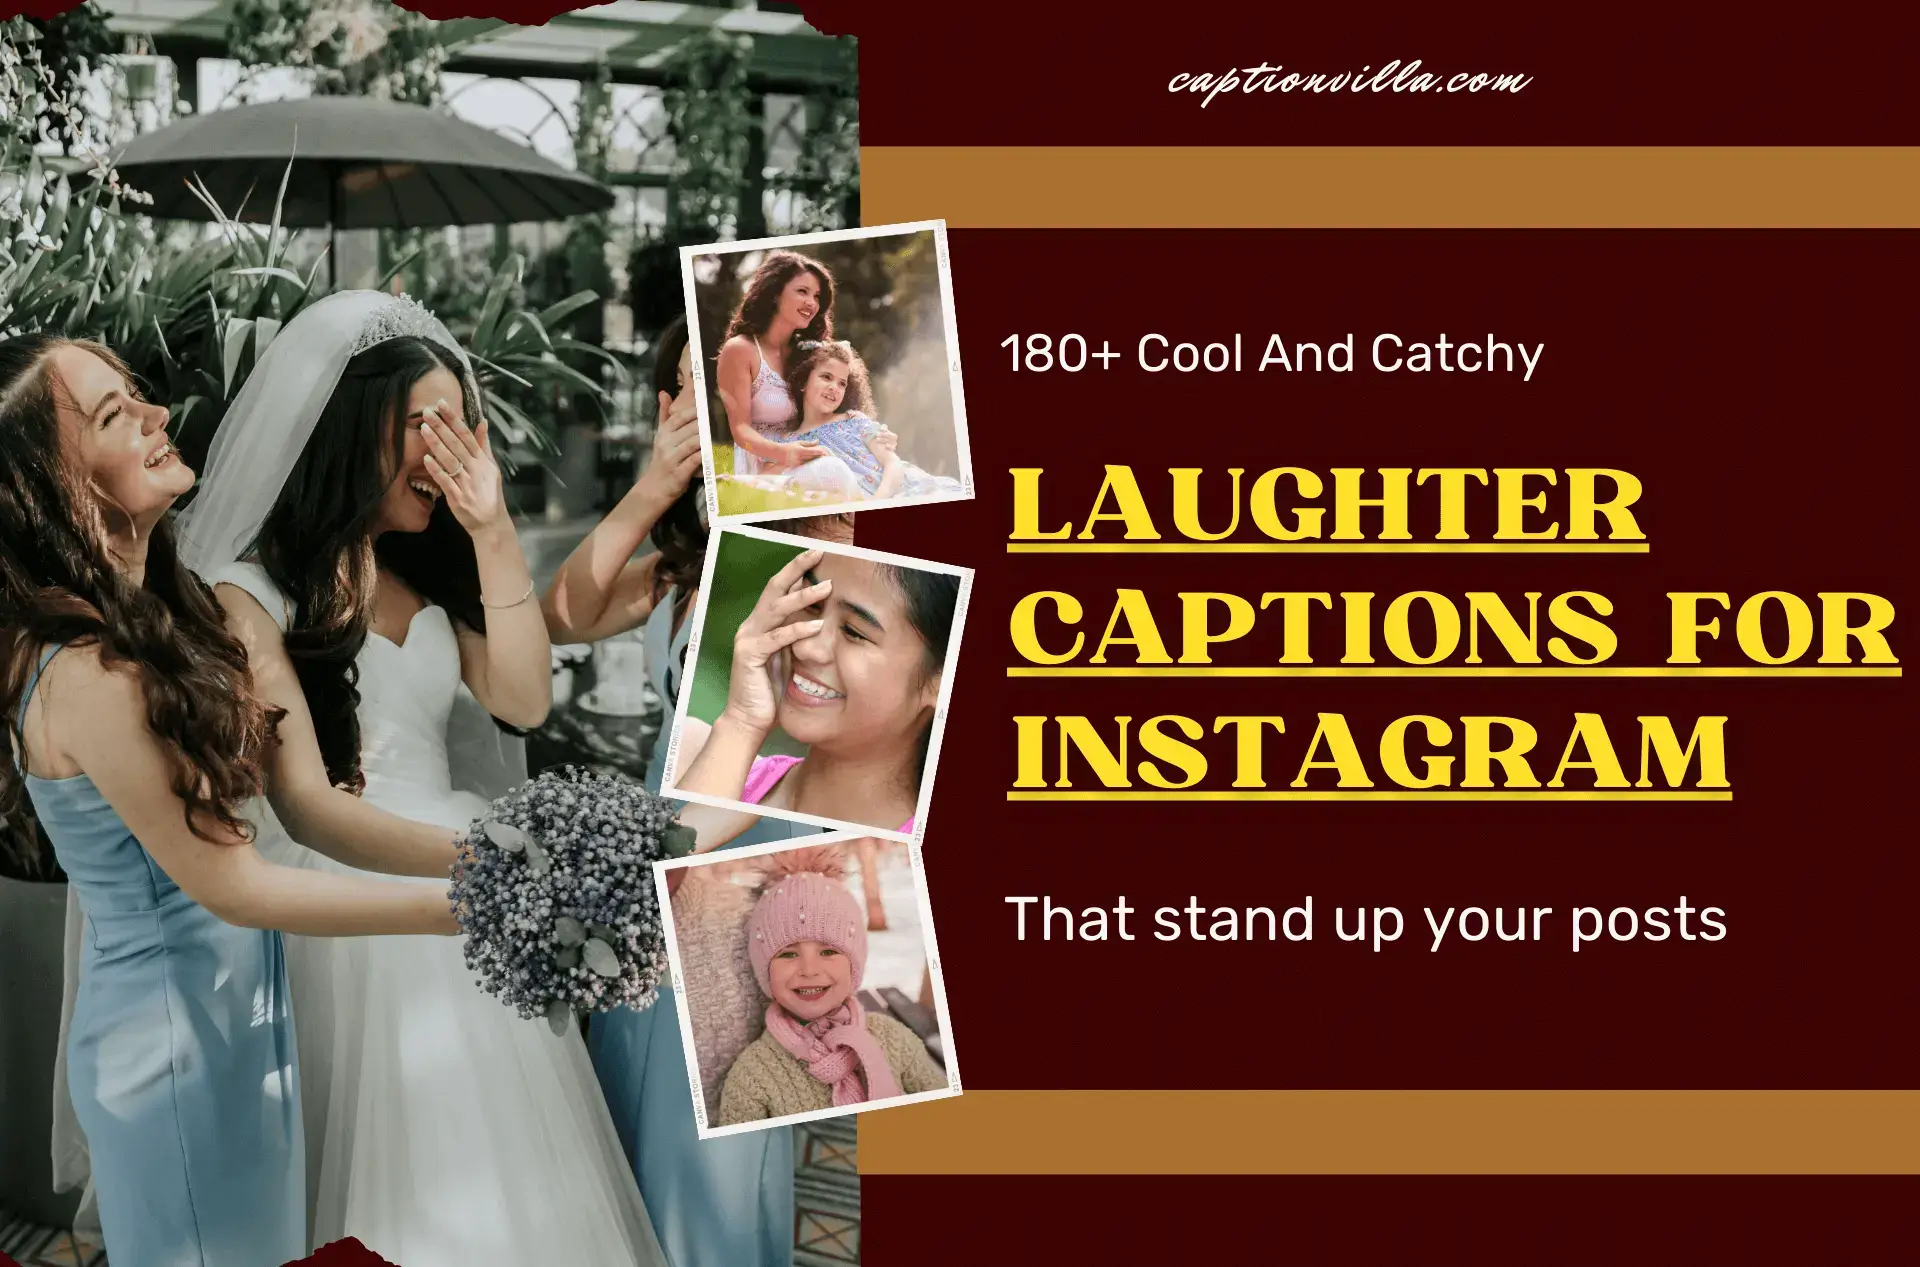 This amazing image of laughing includes the title of Laughter Captions for Instagram.